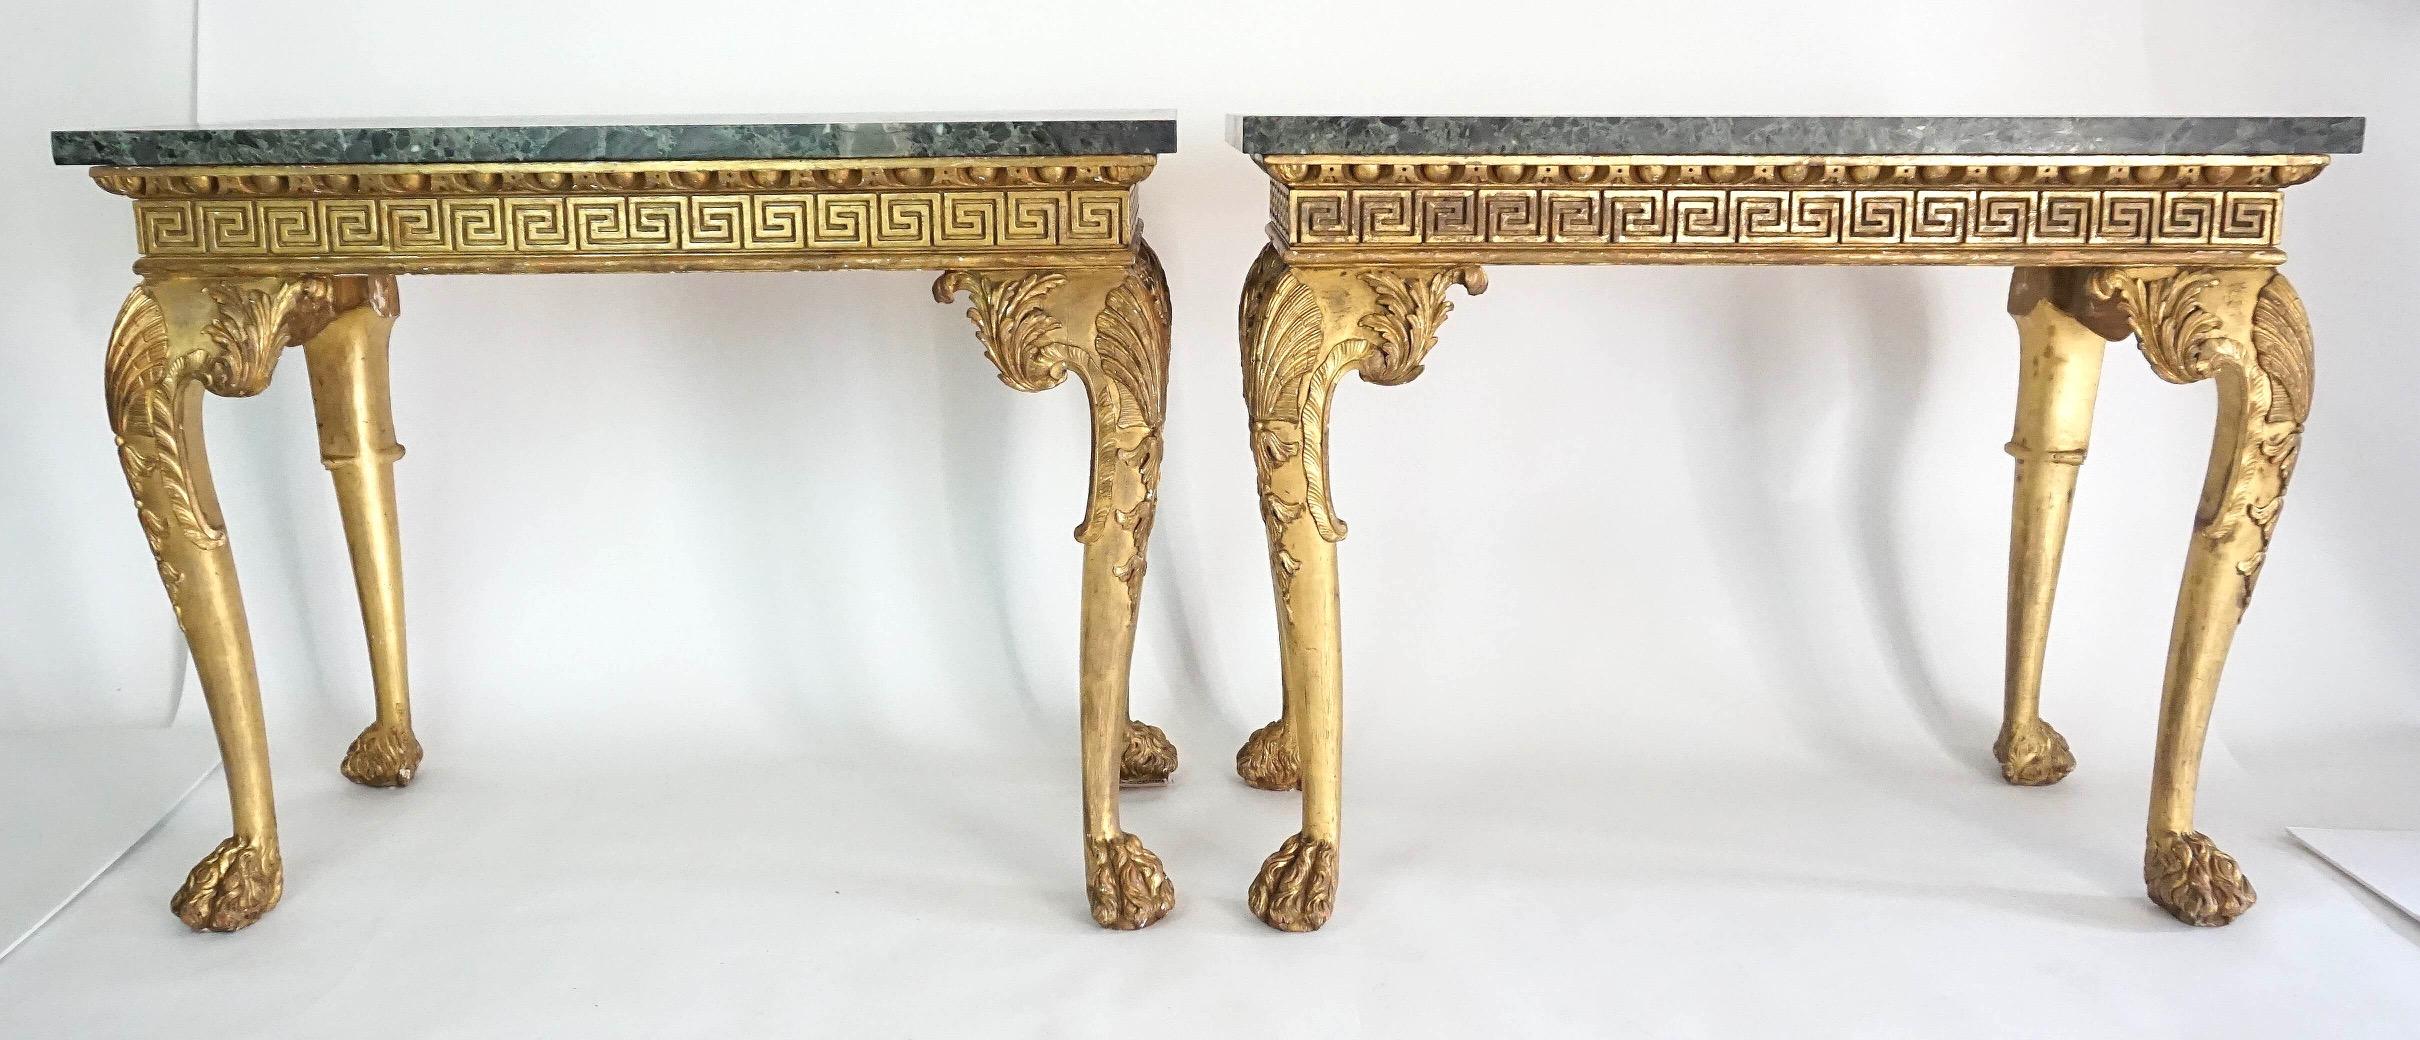 Exquisite and important pair of circa 1815 Anglo-Irish regency console or side tables in the manner of William Kent having original verde antico marble tops on original-finish giltwood bases with egg-and-dart moulding above Greek key frieze on